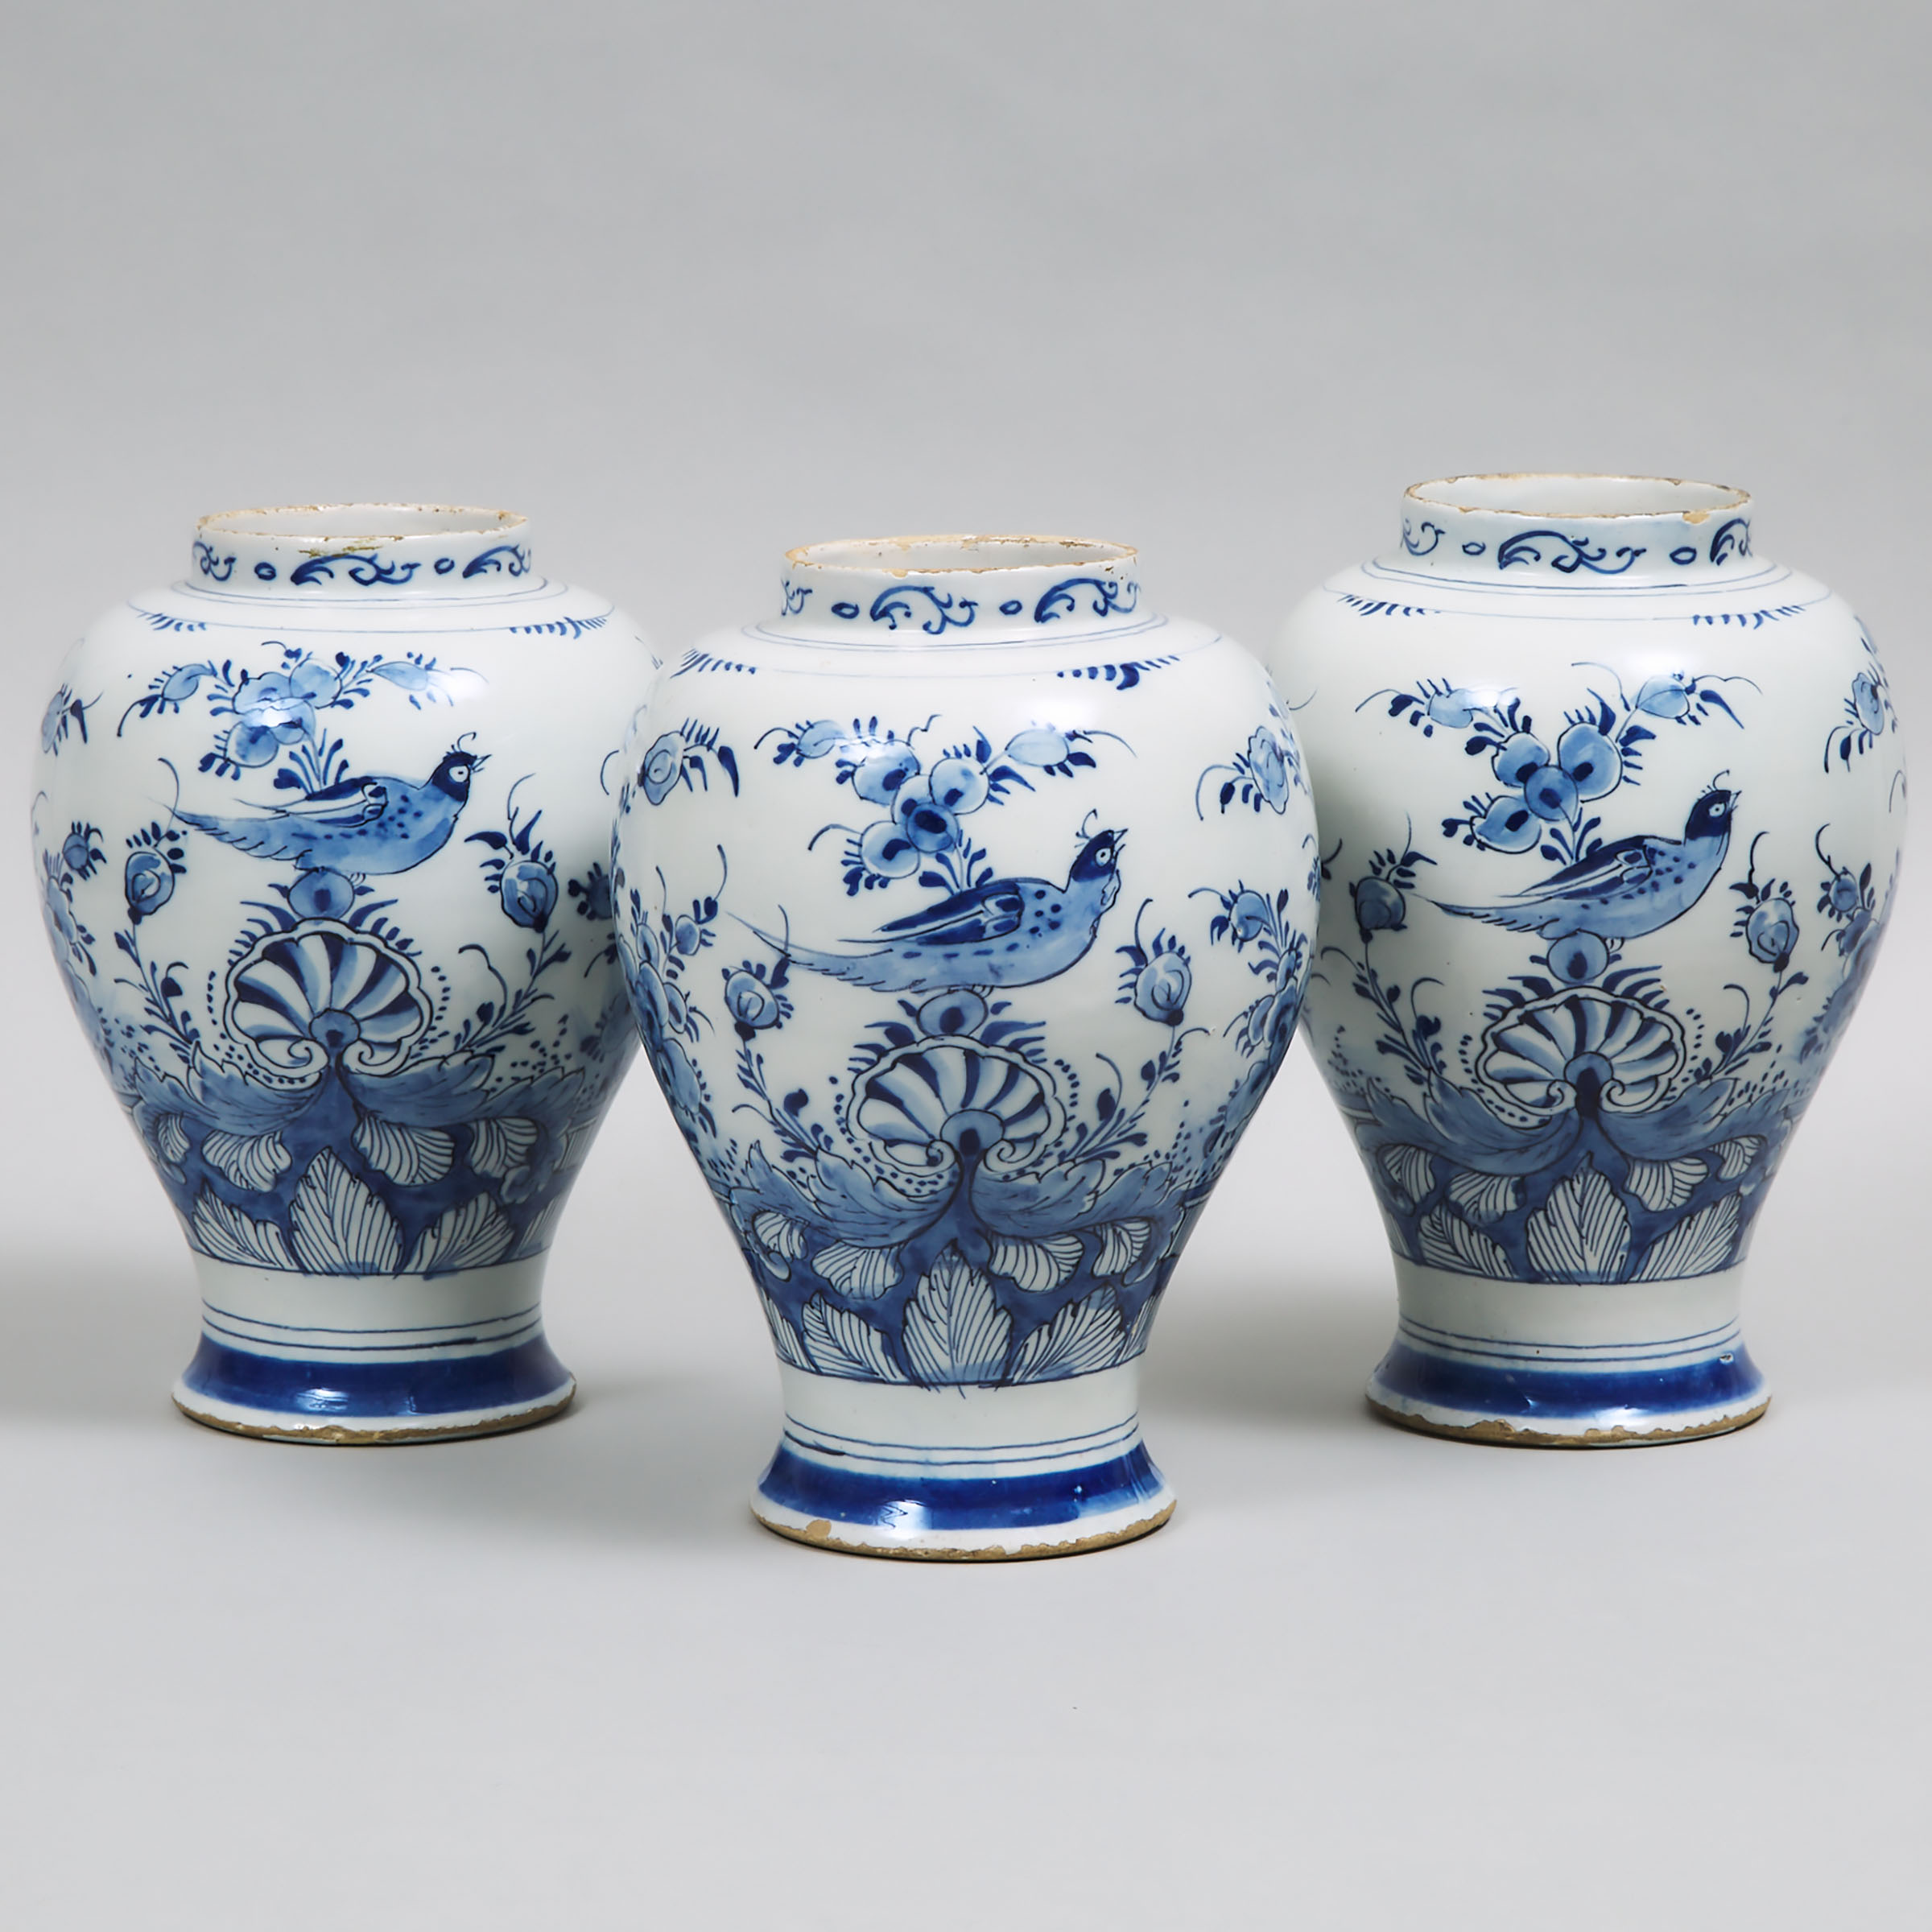 Set of Three Delft Blue Painted Baluster Vases, late 18th/19th century